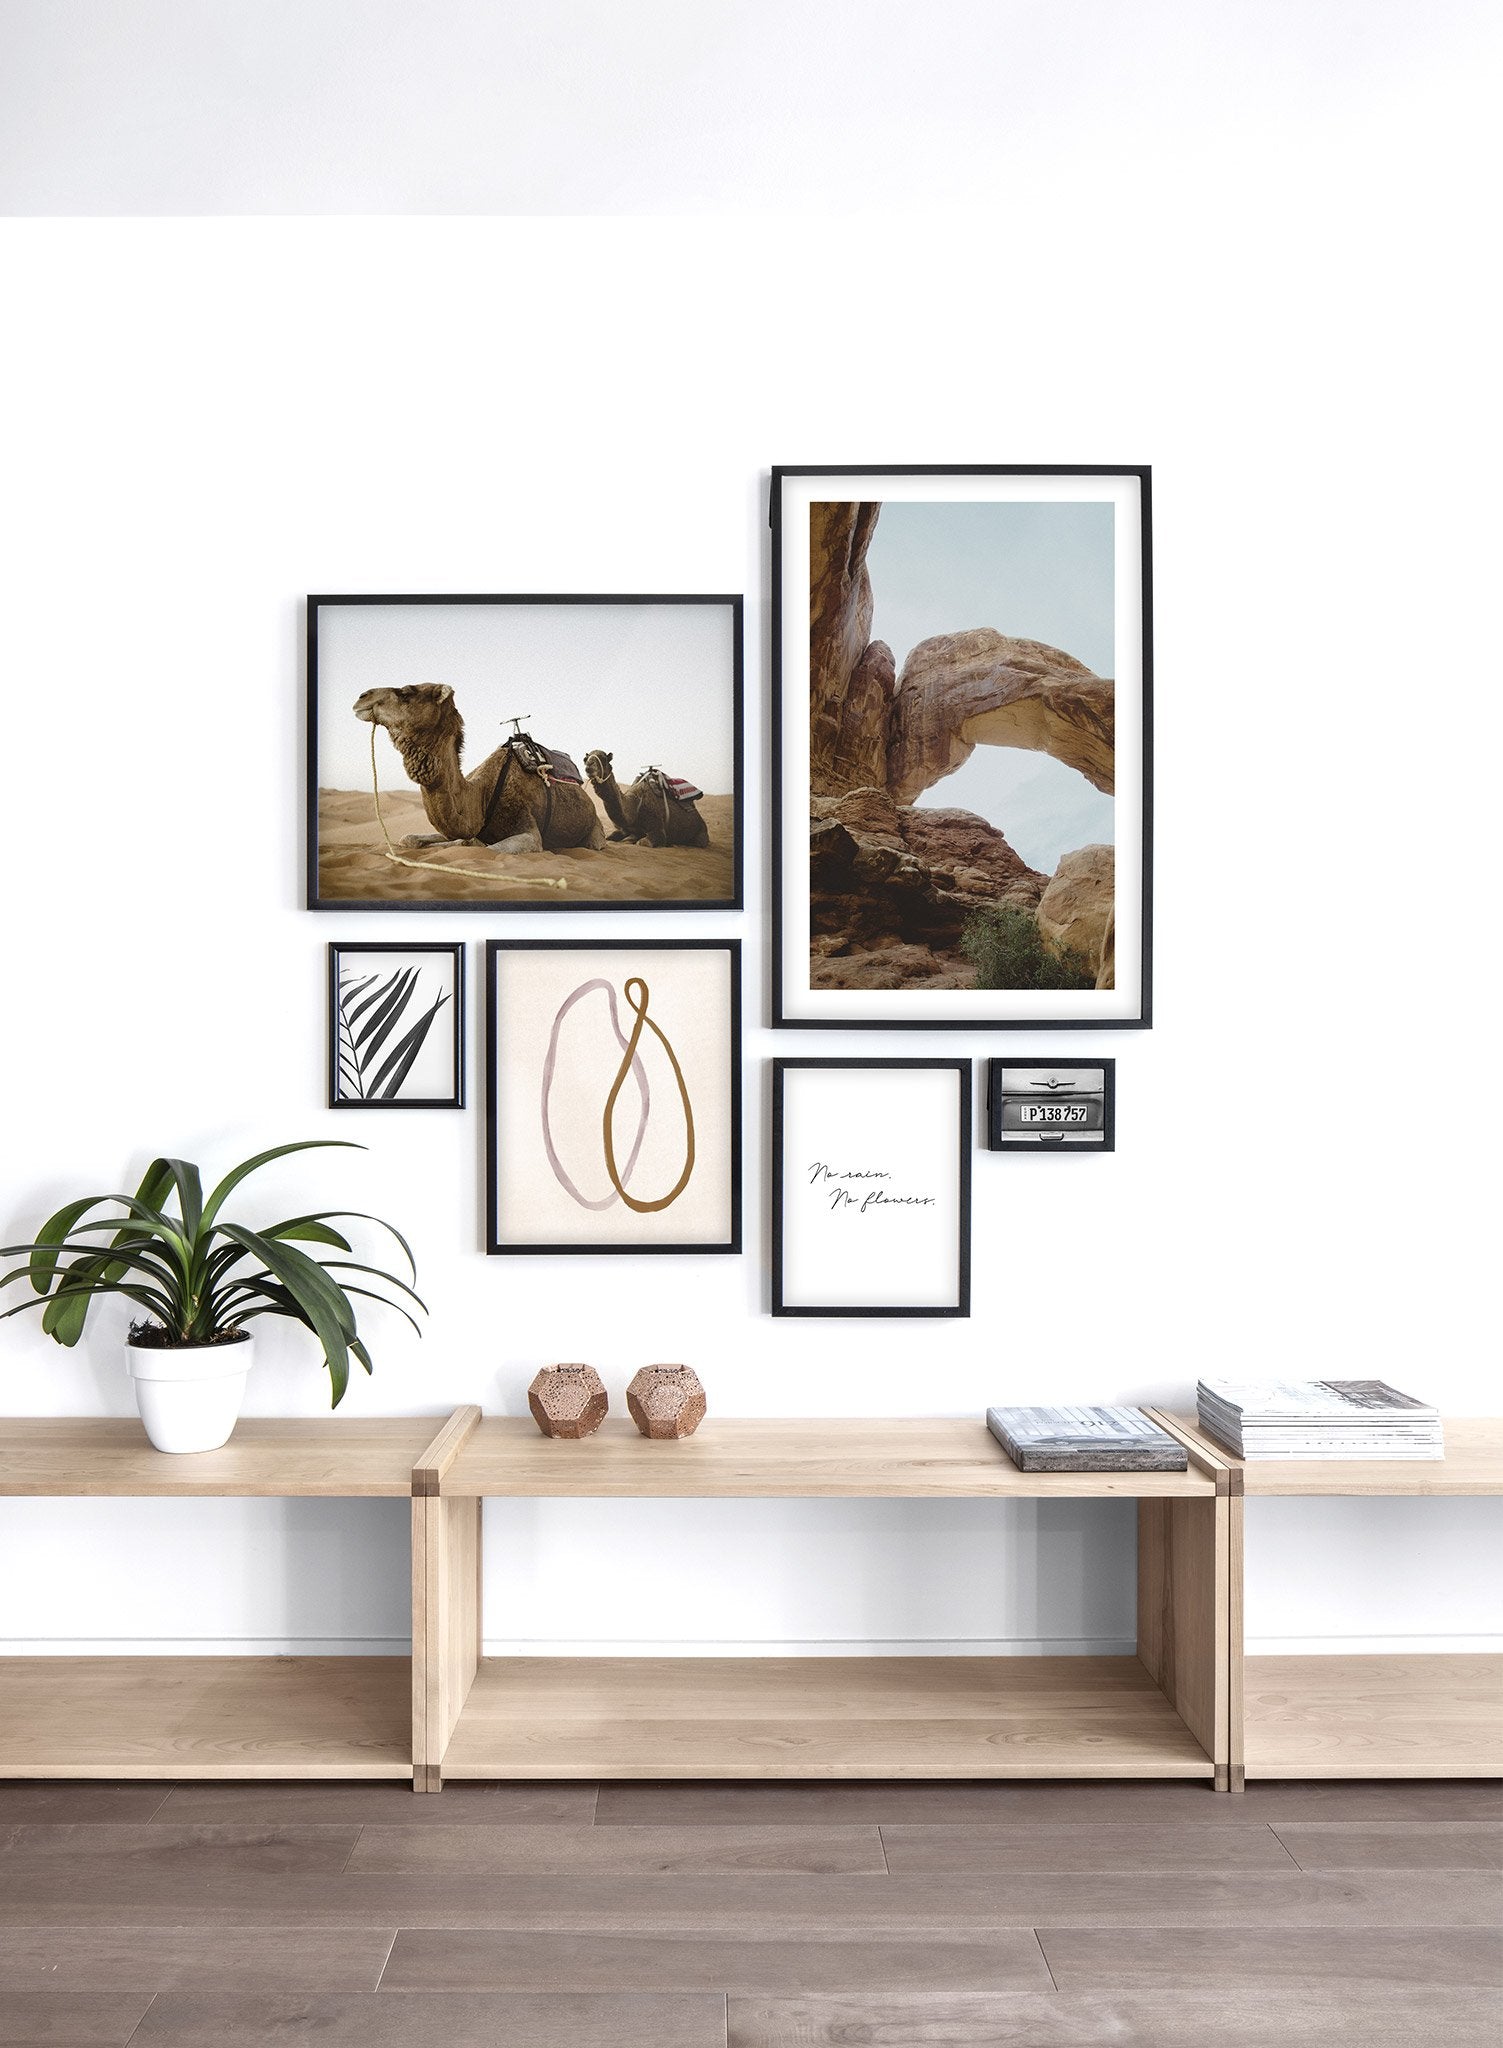 Modern nature photography poster by Opposite Wall with camels in the desert - Lifestyle Gallery - Living Room